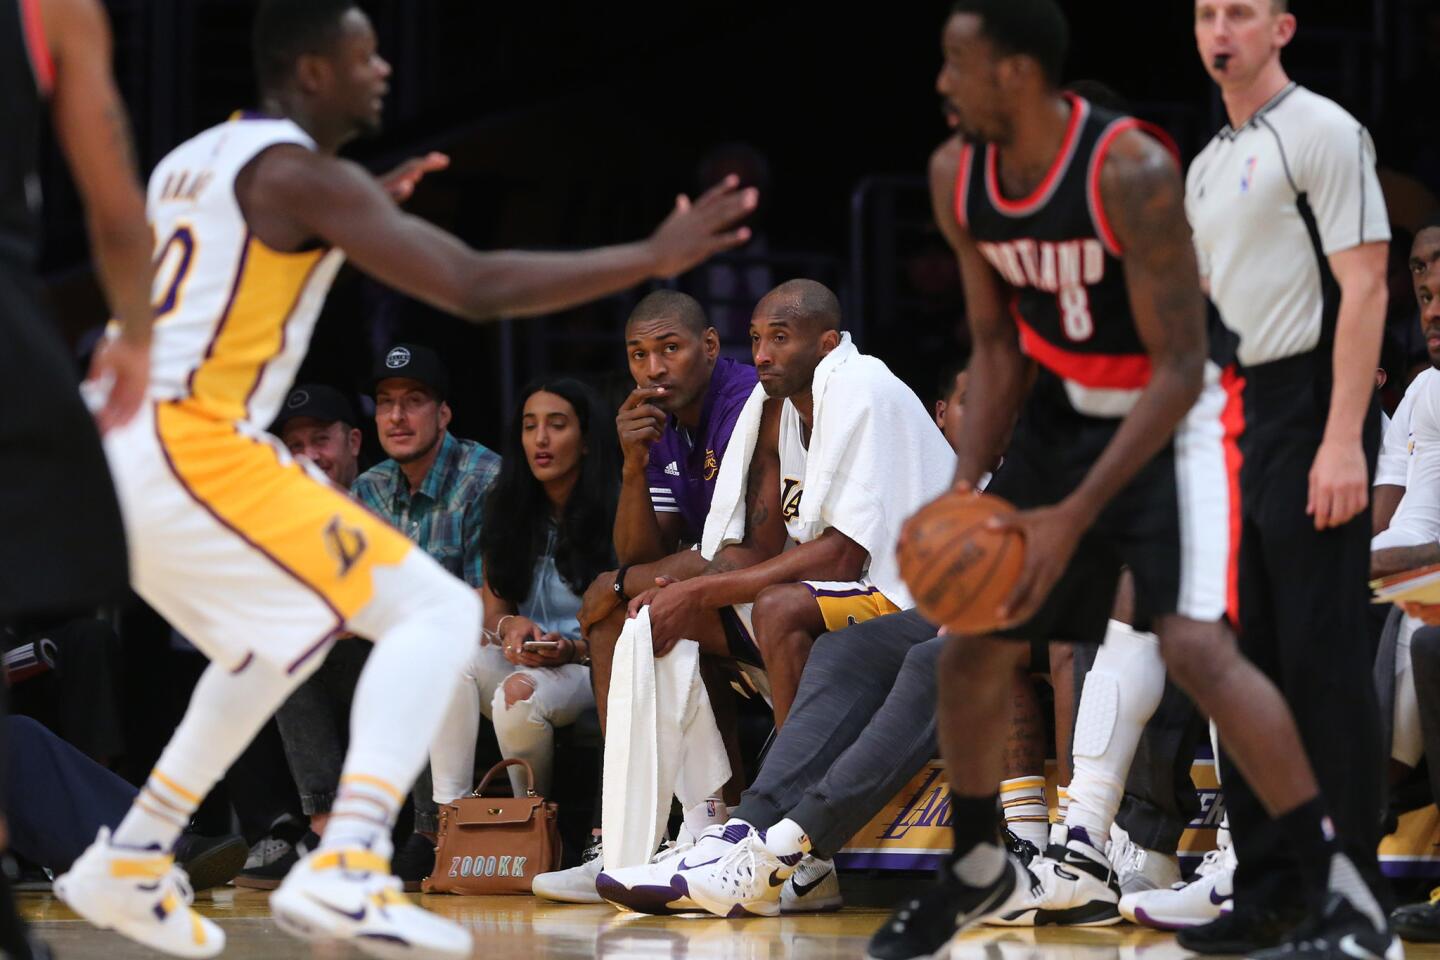 Lakers veterans Kobe Bryant and Metta World Peace watch the action from the bench in the waning moments of a 107-93 loss to the Trail Blazers.